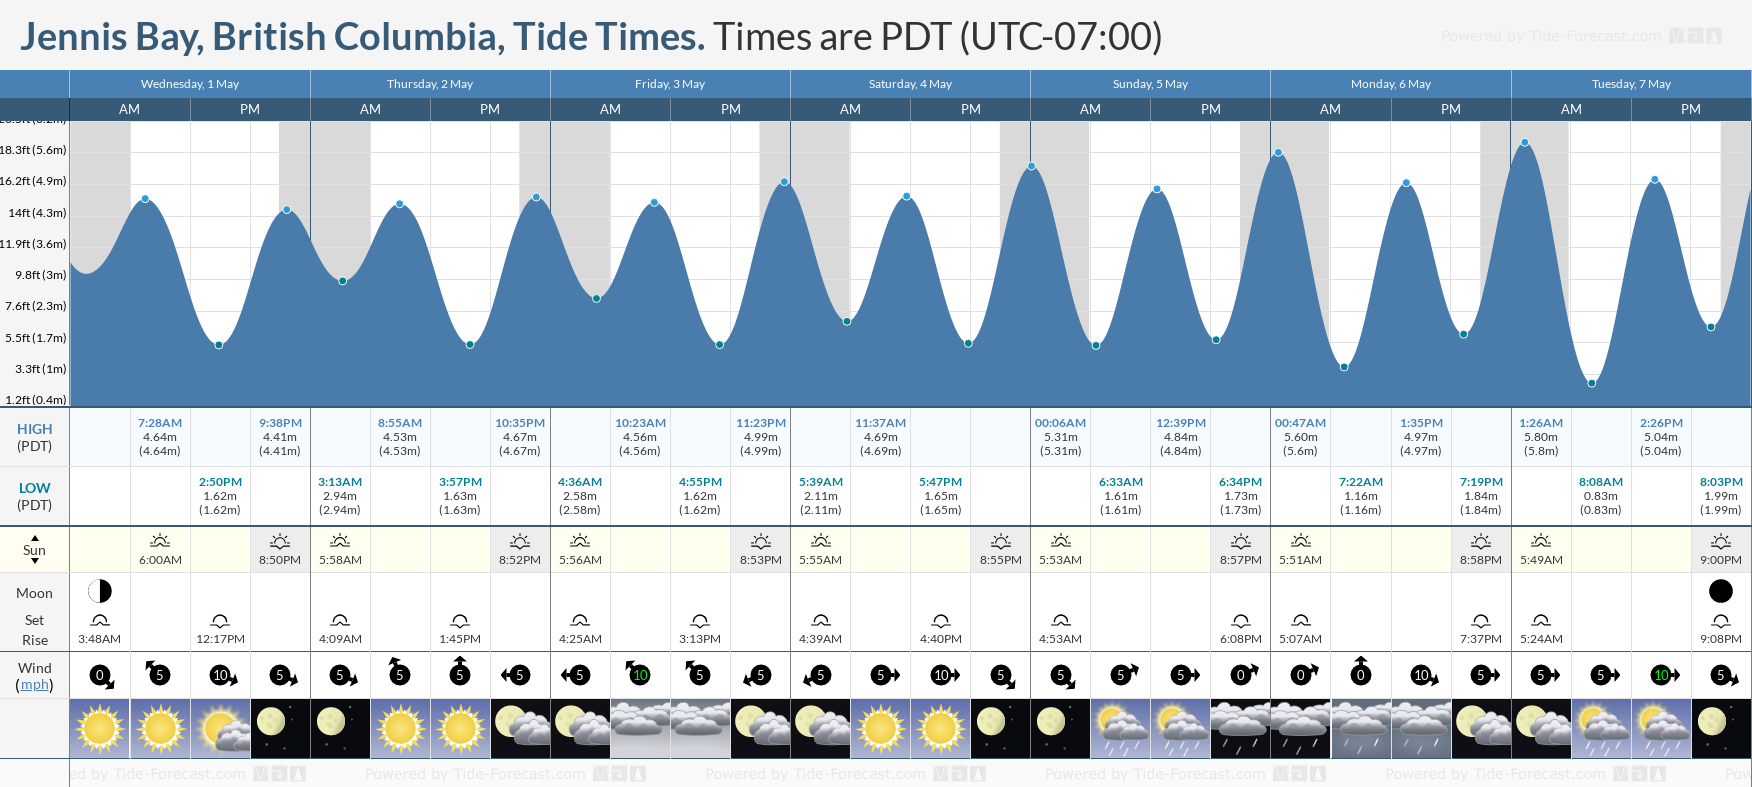 Jennis Bay, British Columbia Tide Chart including high and low tide tide times for the next 7 days